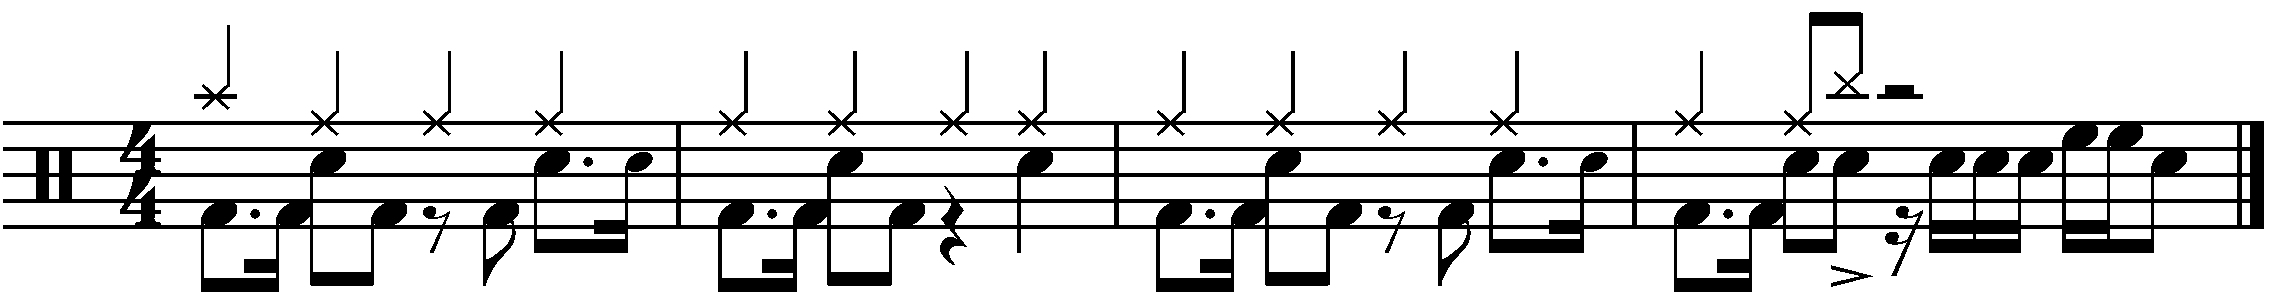 An exmple of pre empting a fill with two eight notes